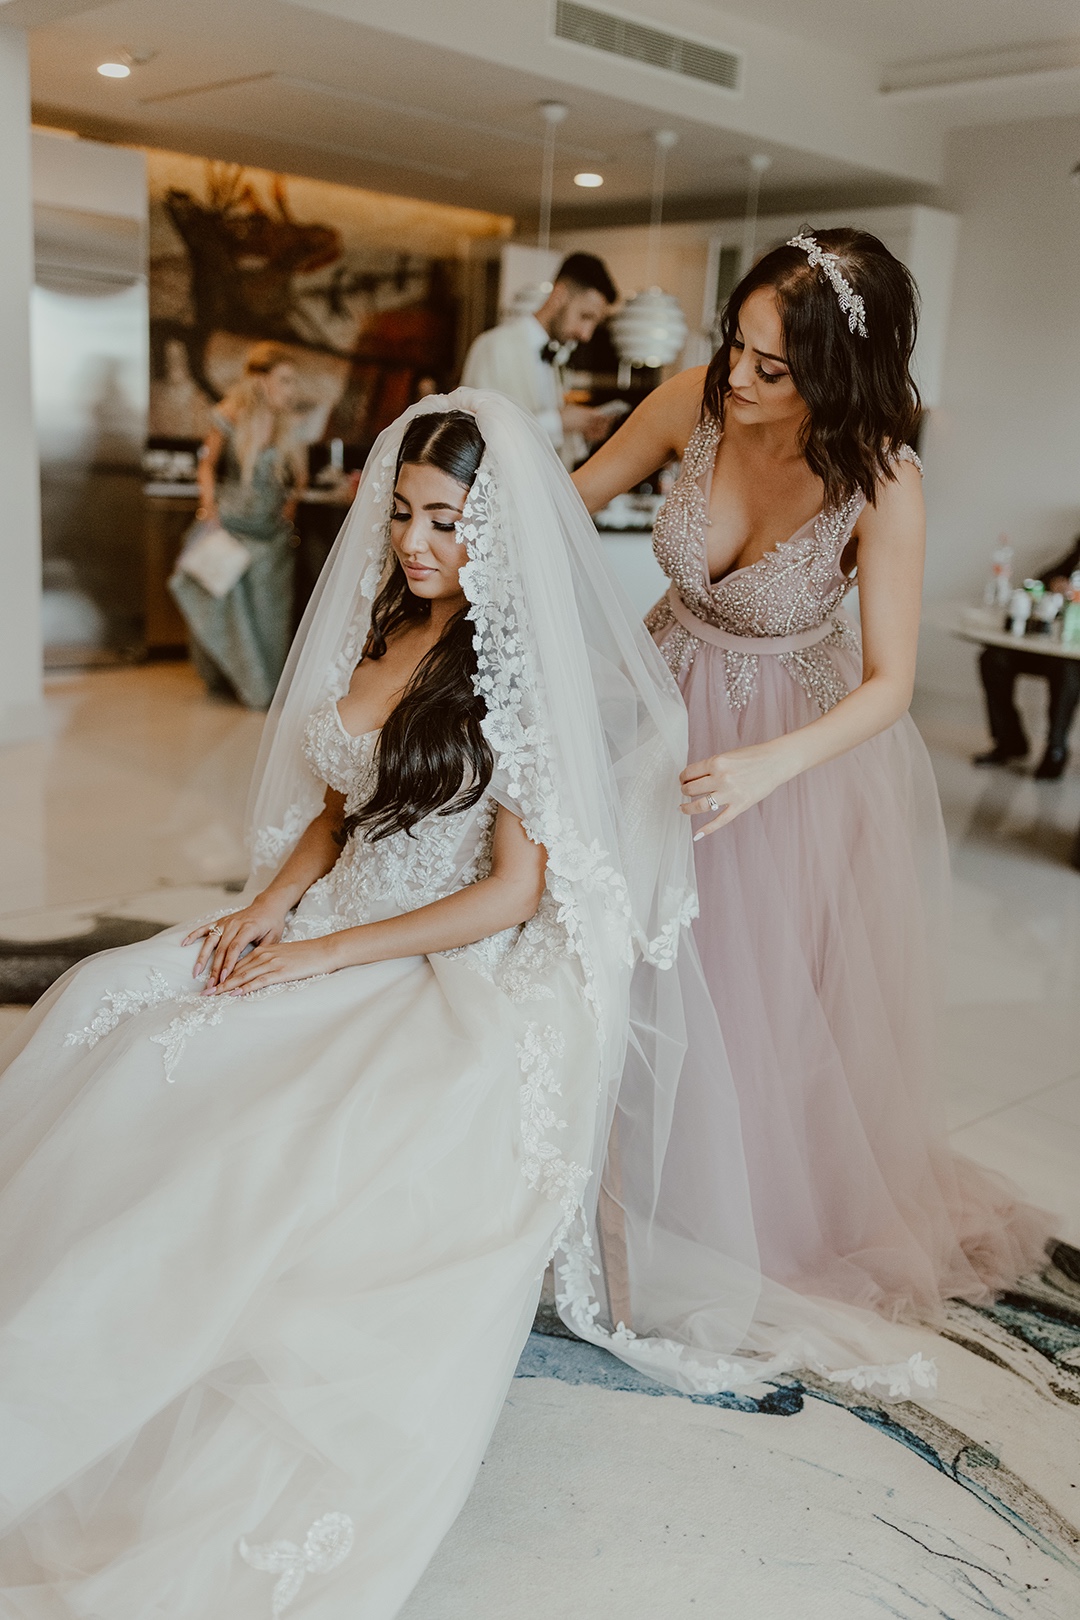 Maid of honor placing lace veil 